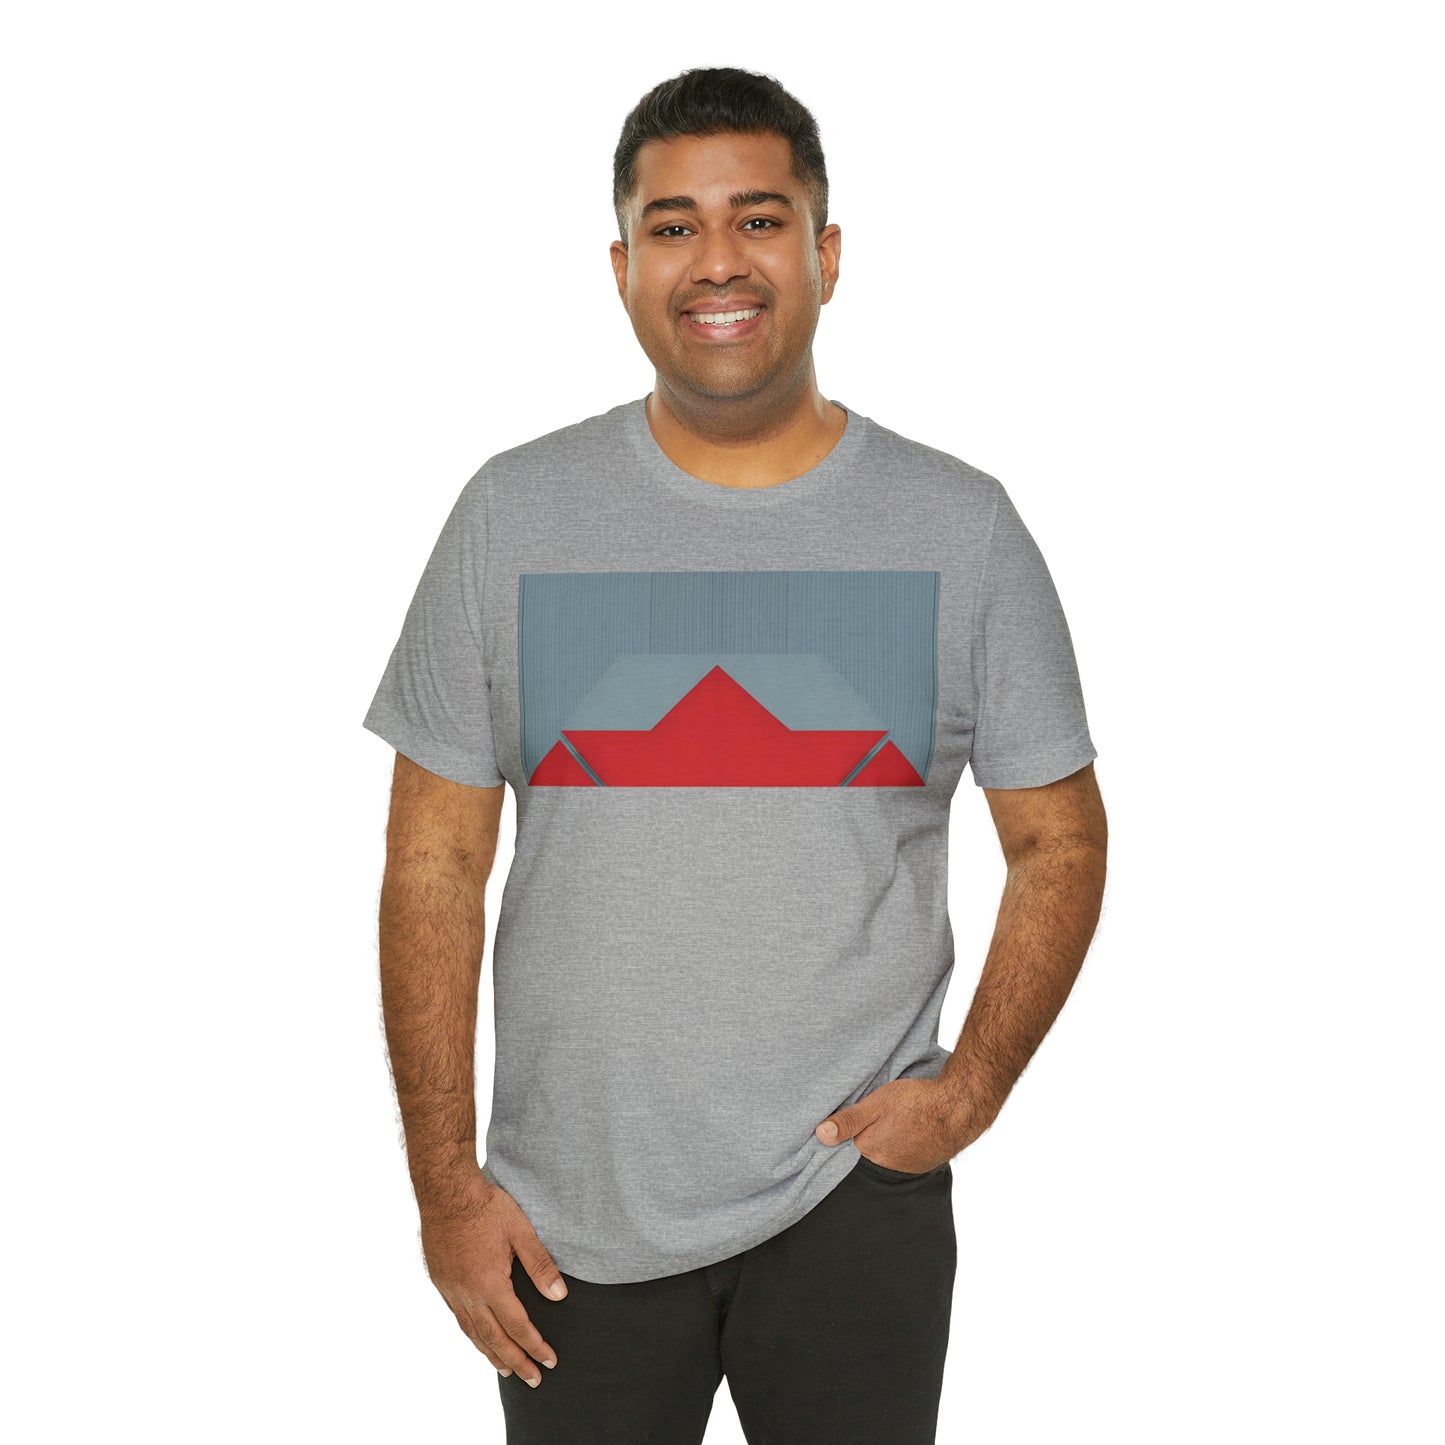 ABSTRACT SHAPES 101 MIRROR - Unisex Jersey Short Sleeve Tee